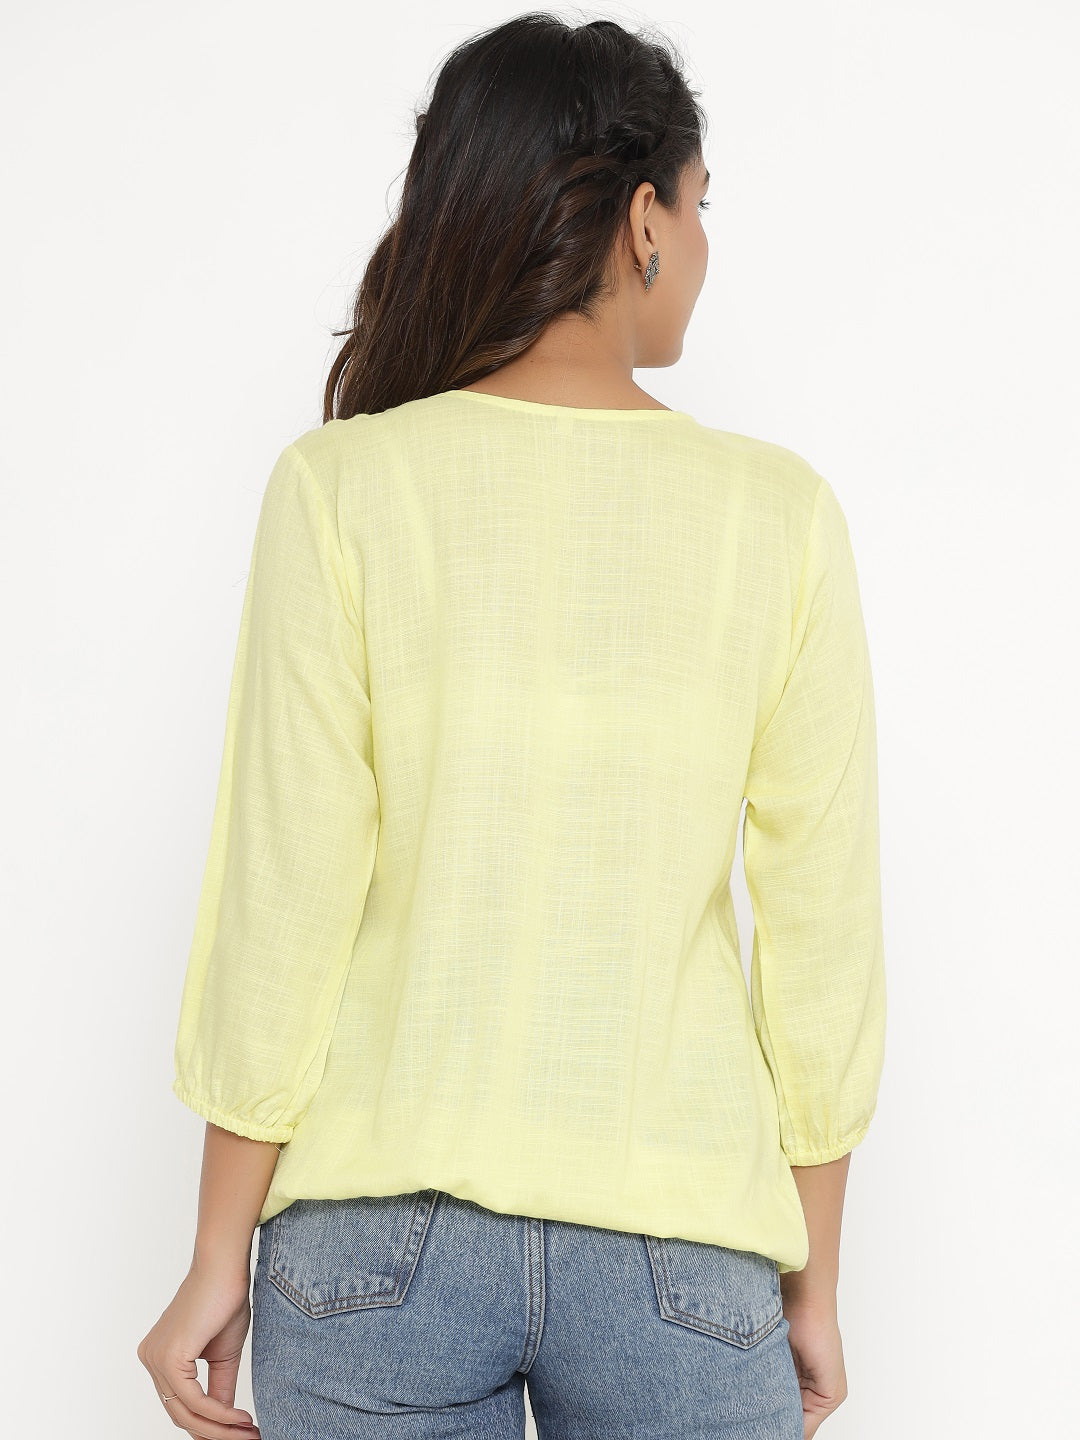 Embroidered Solid Elasticated Top - Lemon Yellow